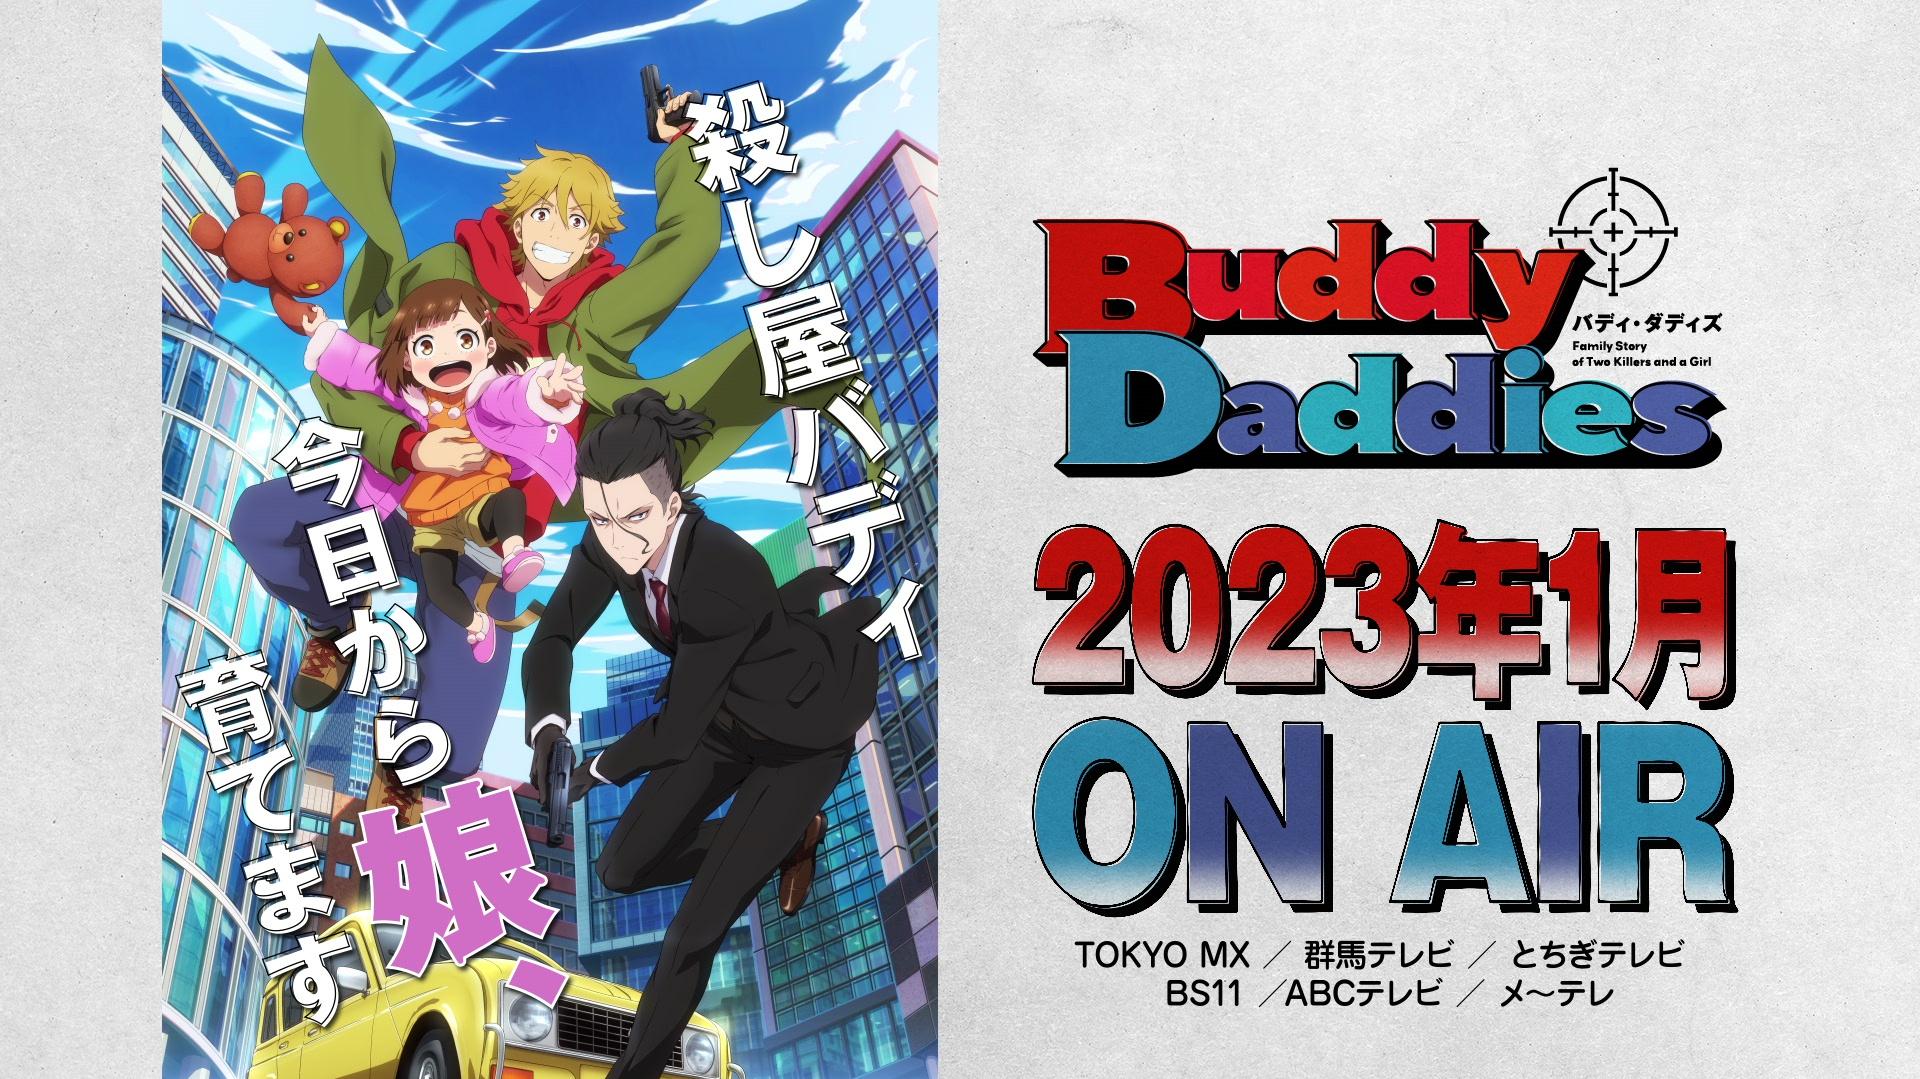 Anime Trending on Twitter It hits different when two assassin dads dress  up as zoo characters to defend their baby girl Anime Buddy Daddies  httpstcoT2kEdackRI  X